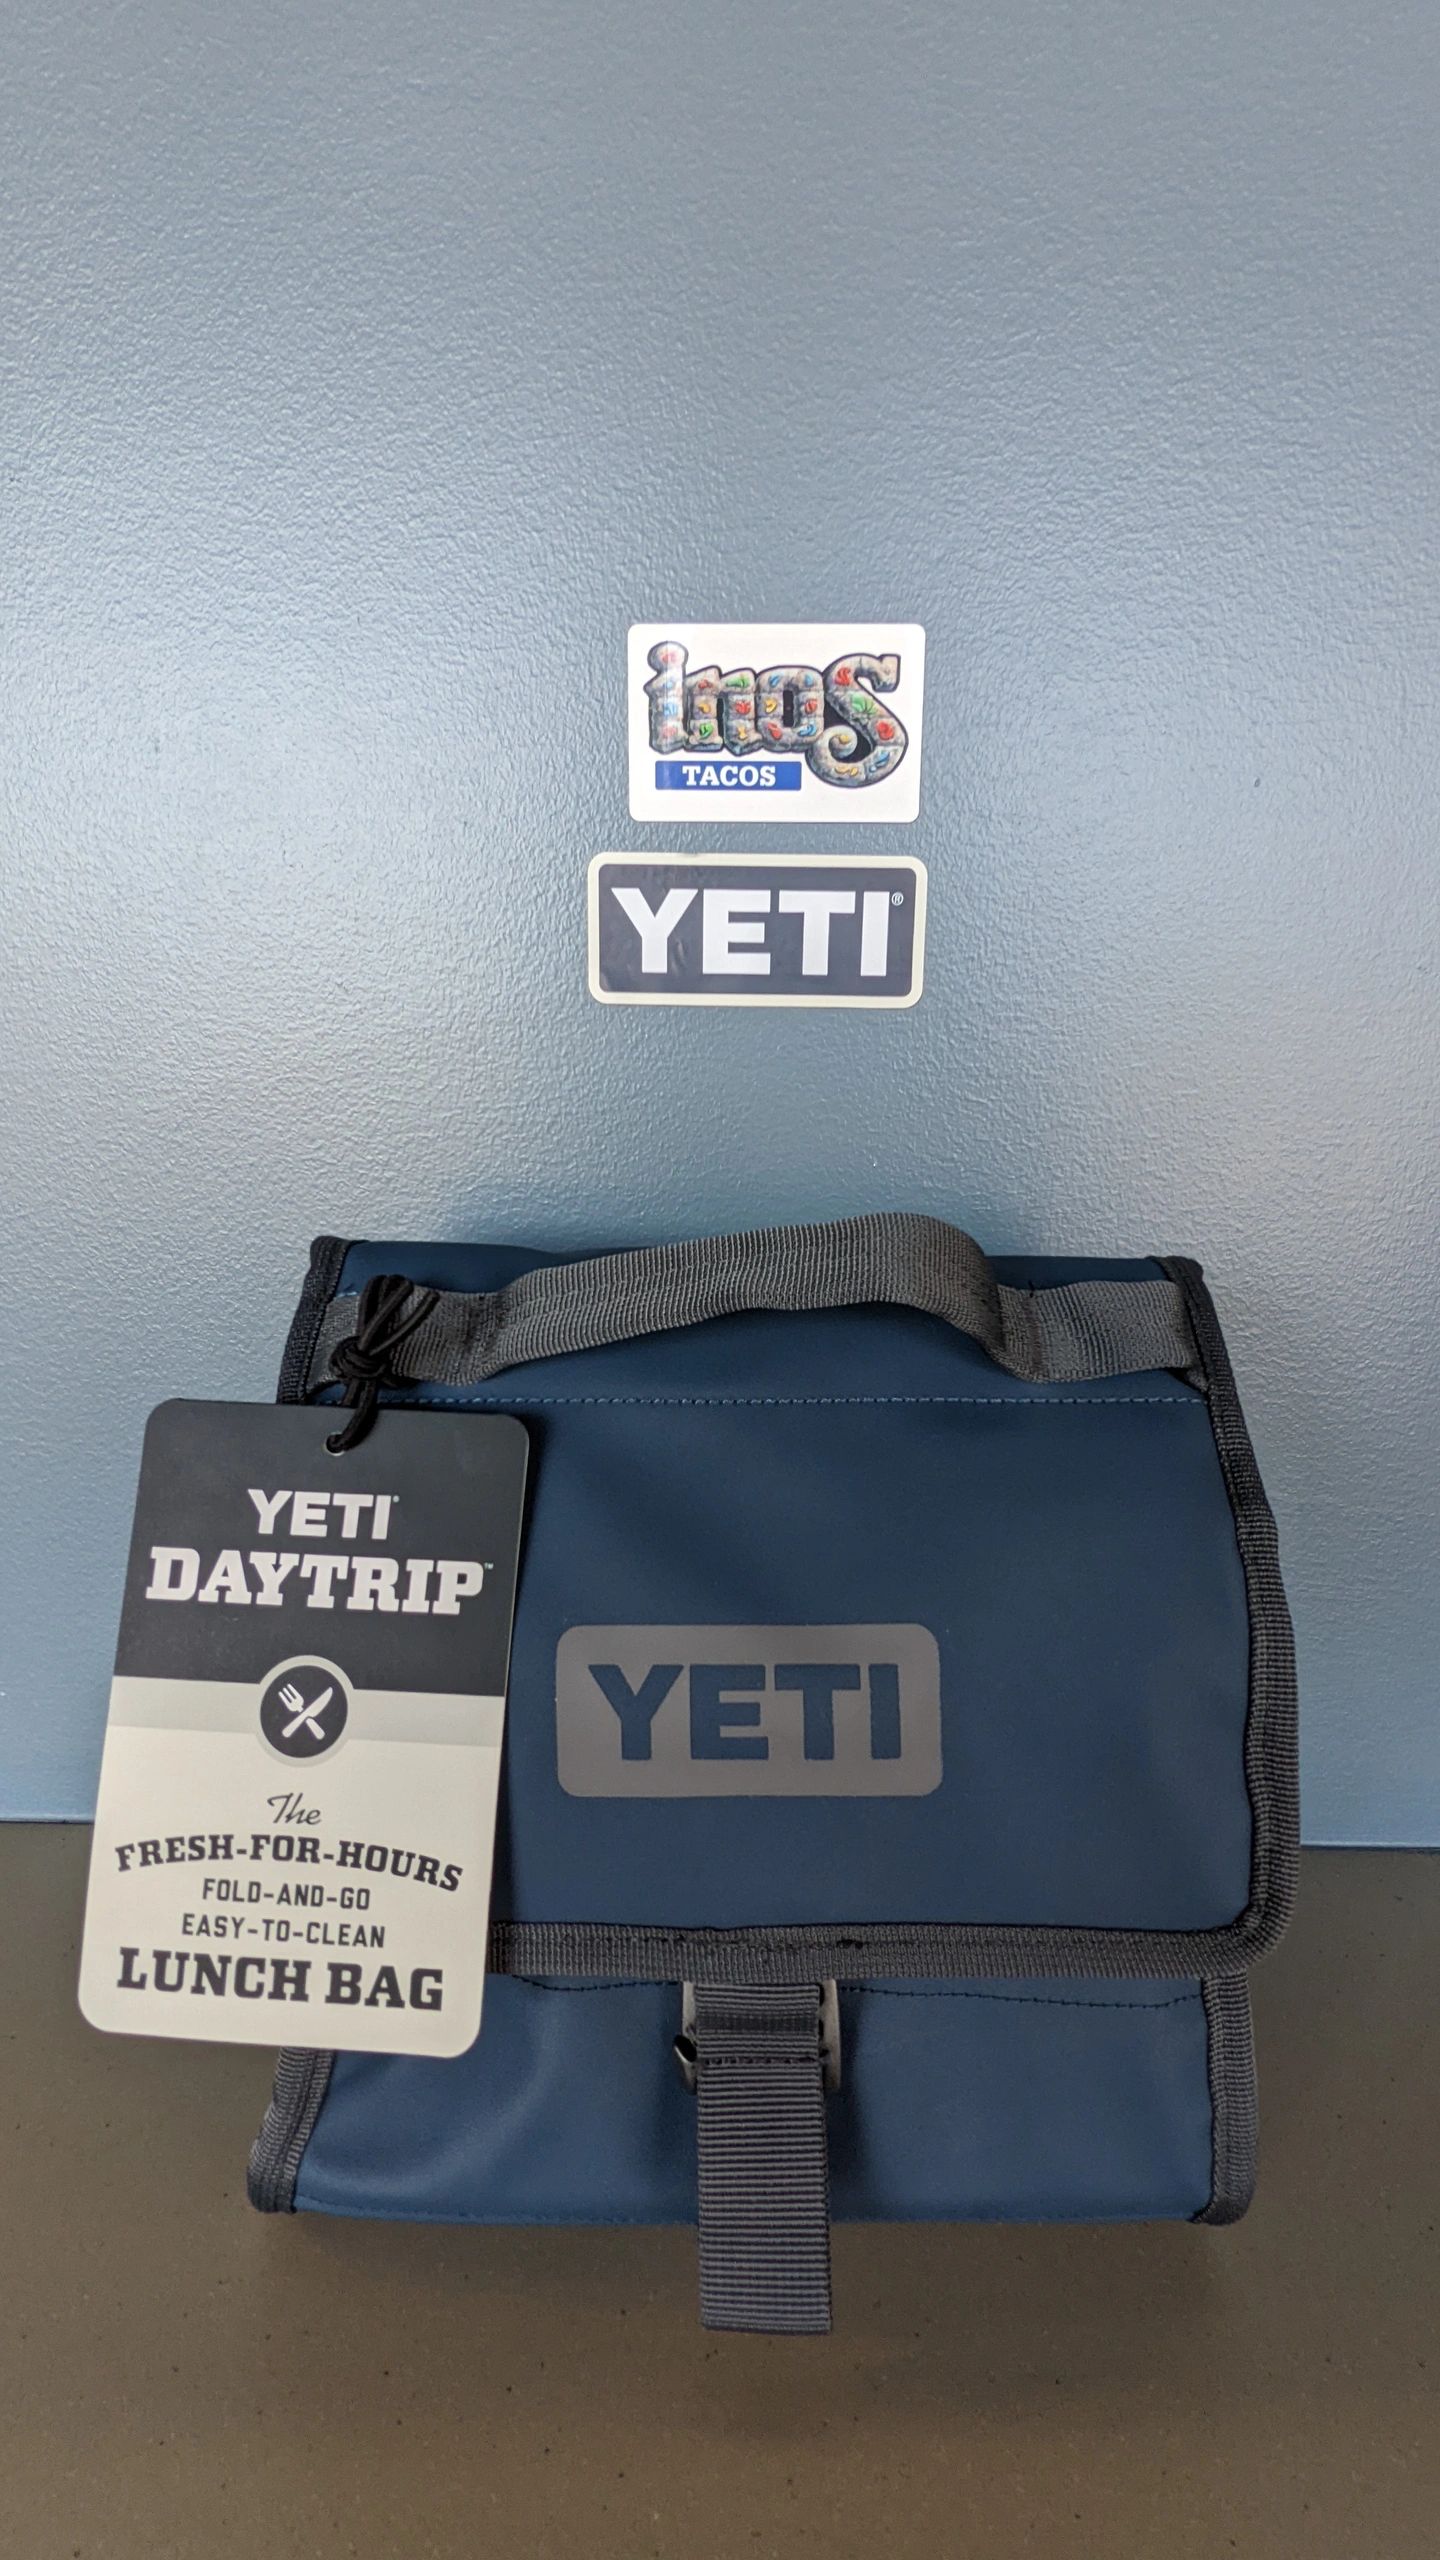 Enter to win a Yeti lunch bag ($80.00 value) Details to come on FB & Instagram.